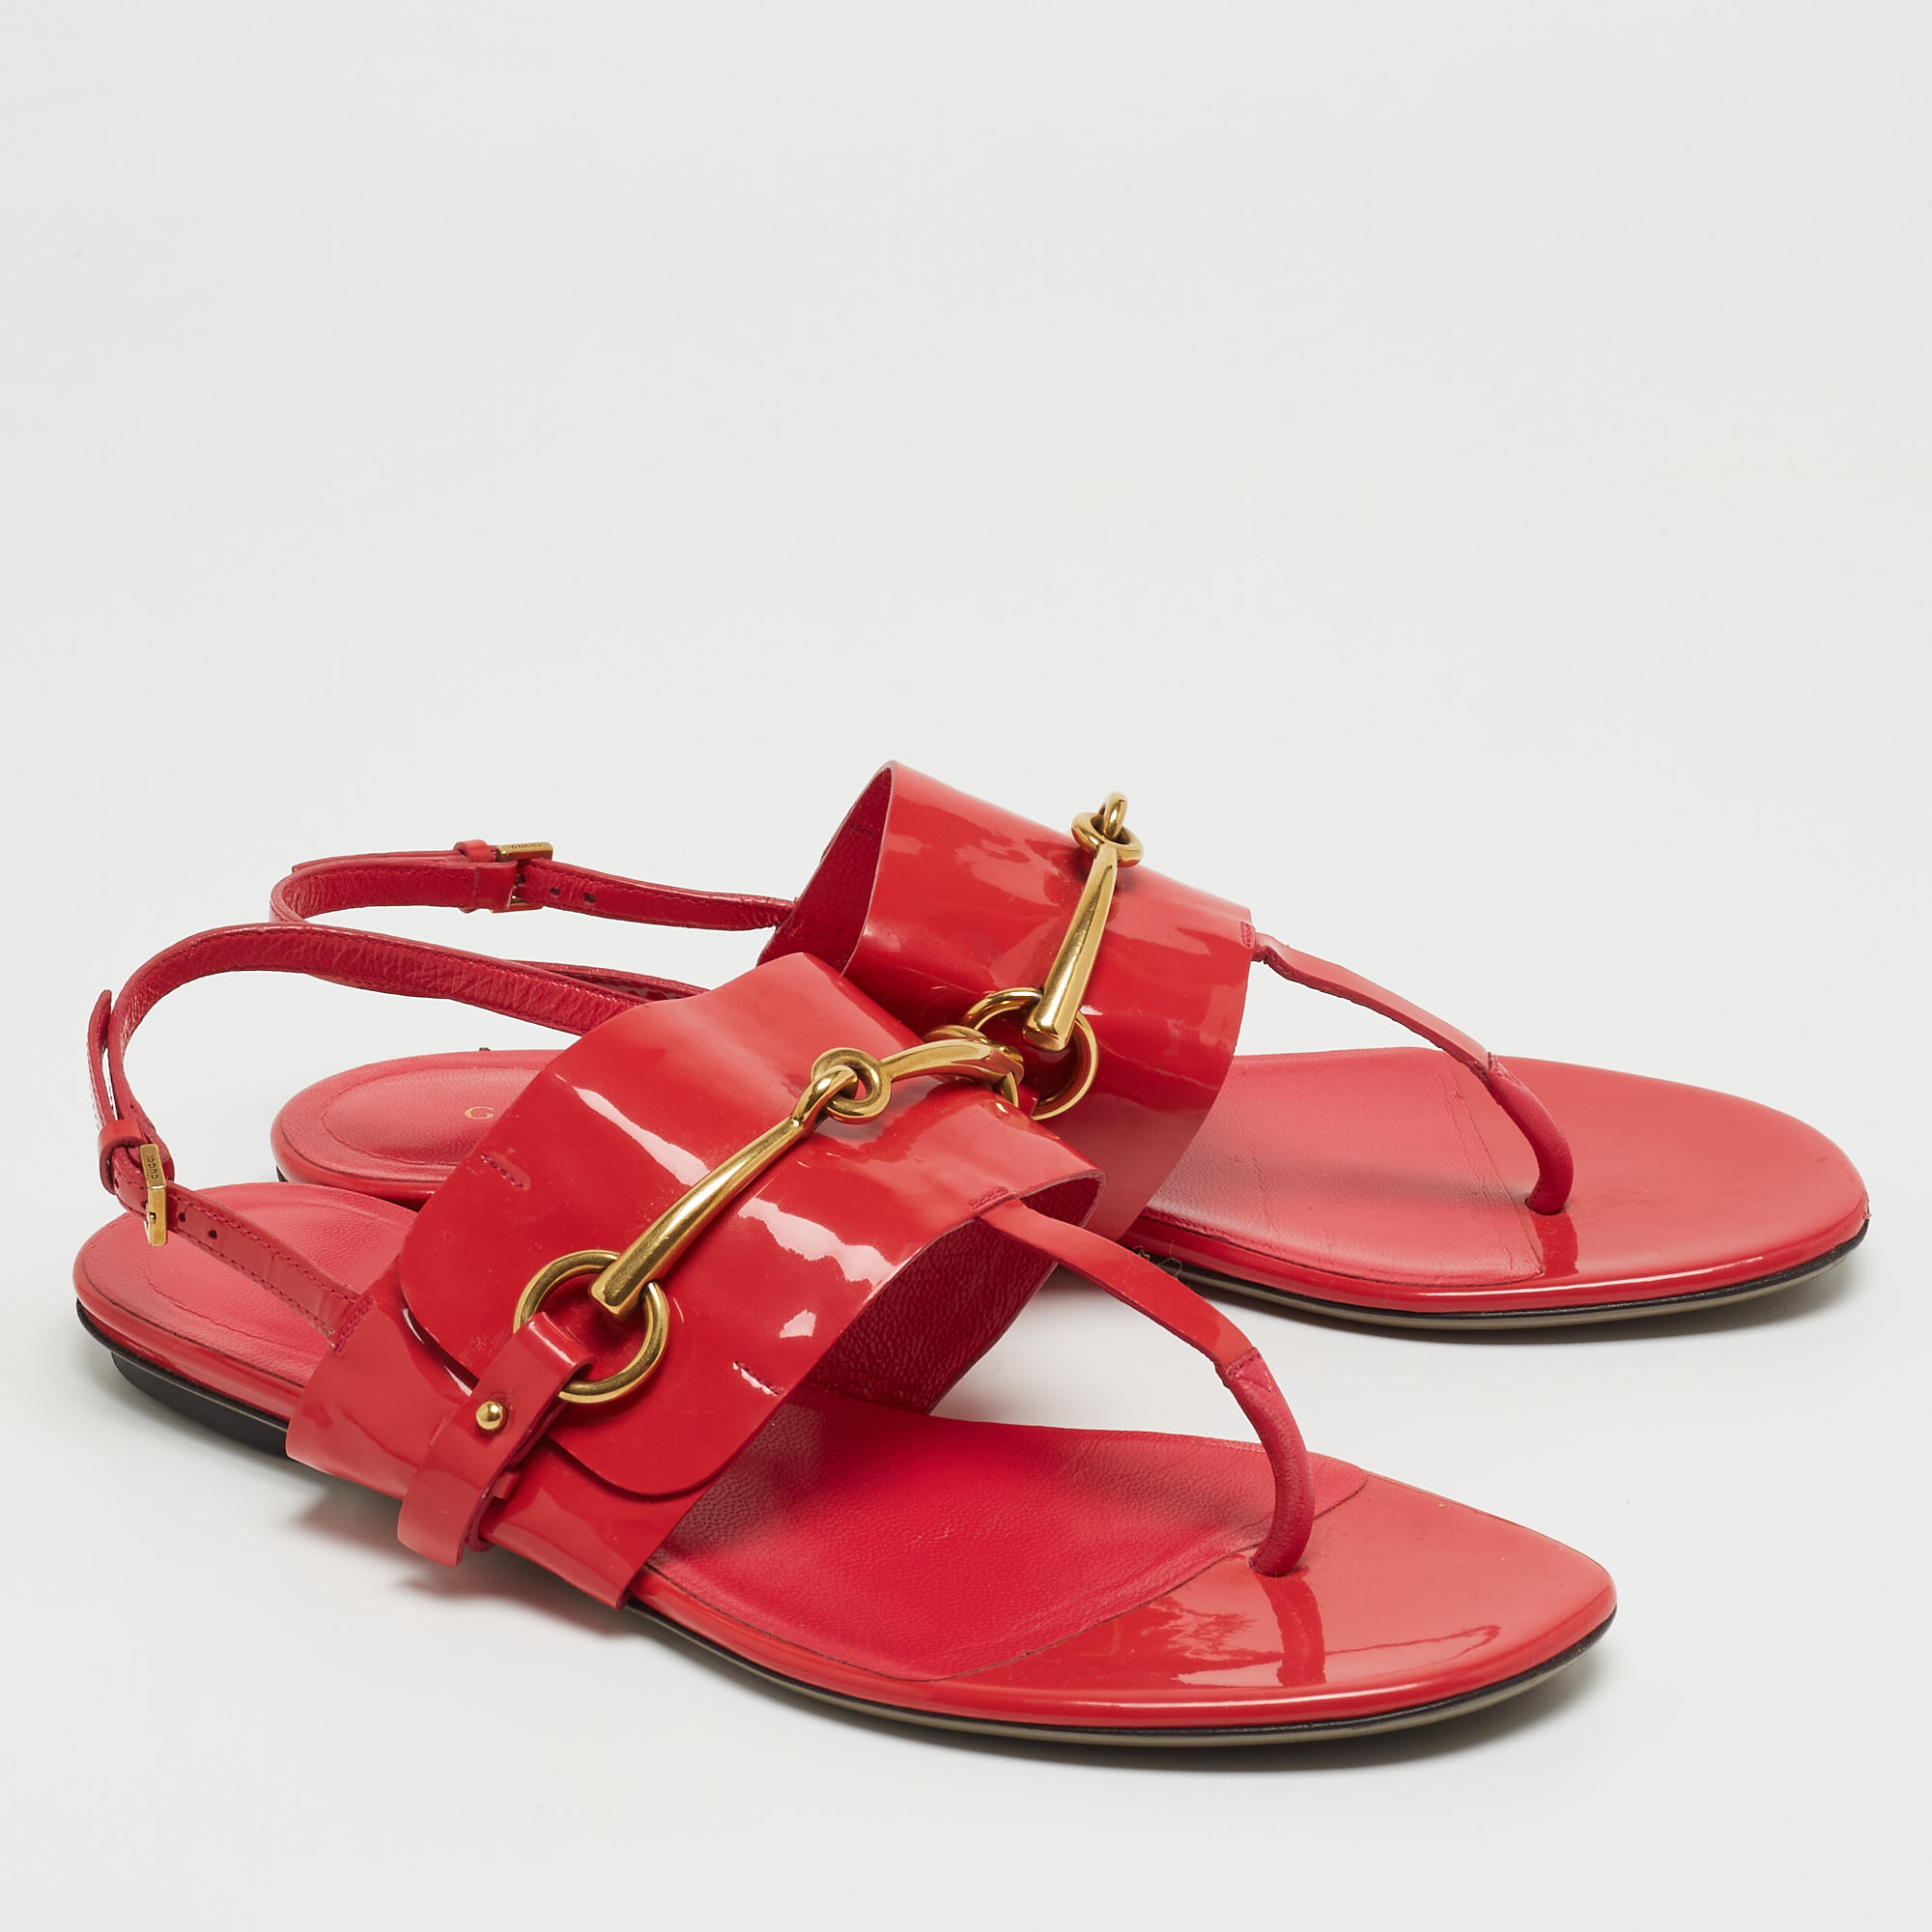 Gucci Red Patent Leather Slingback Flat Sandals Size 38